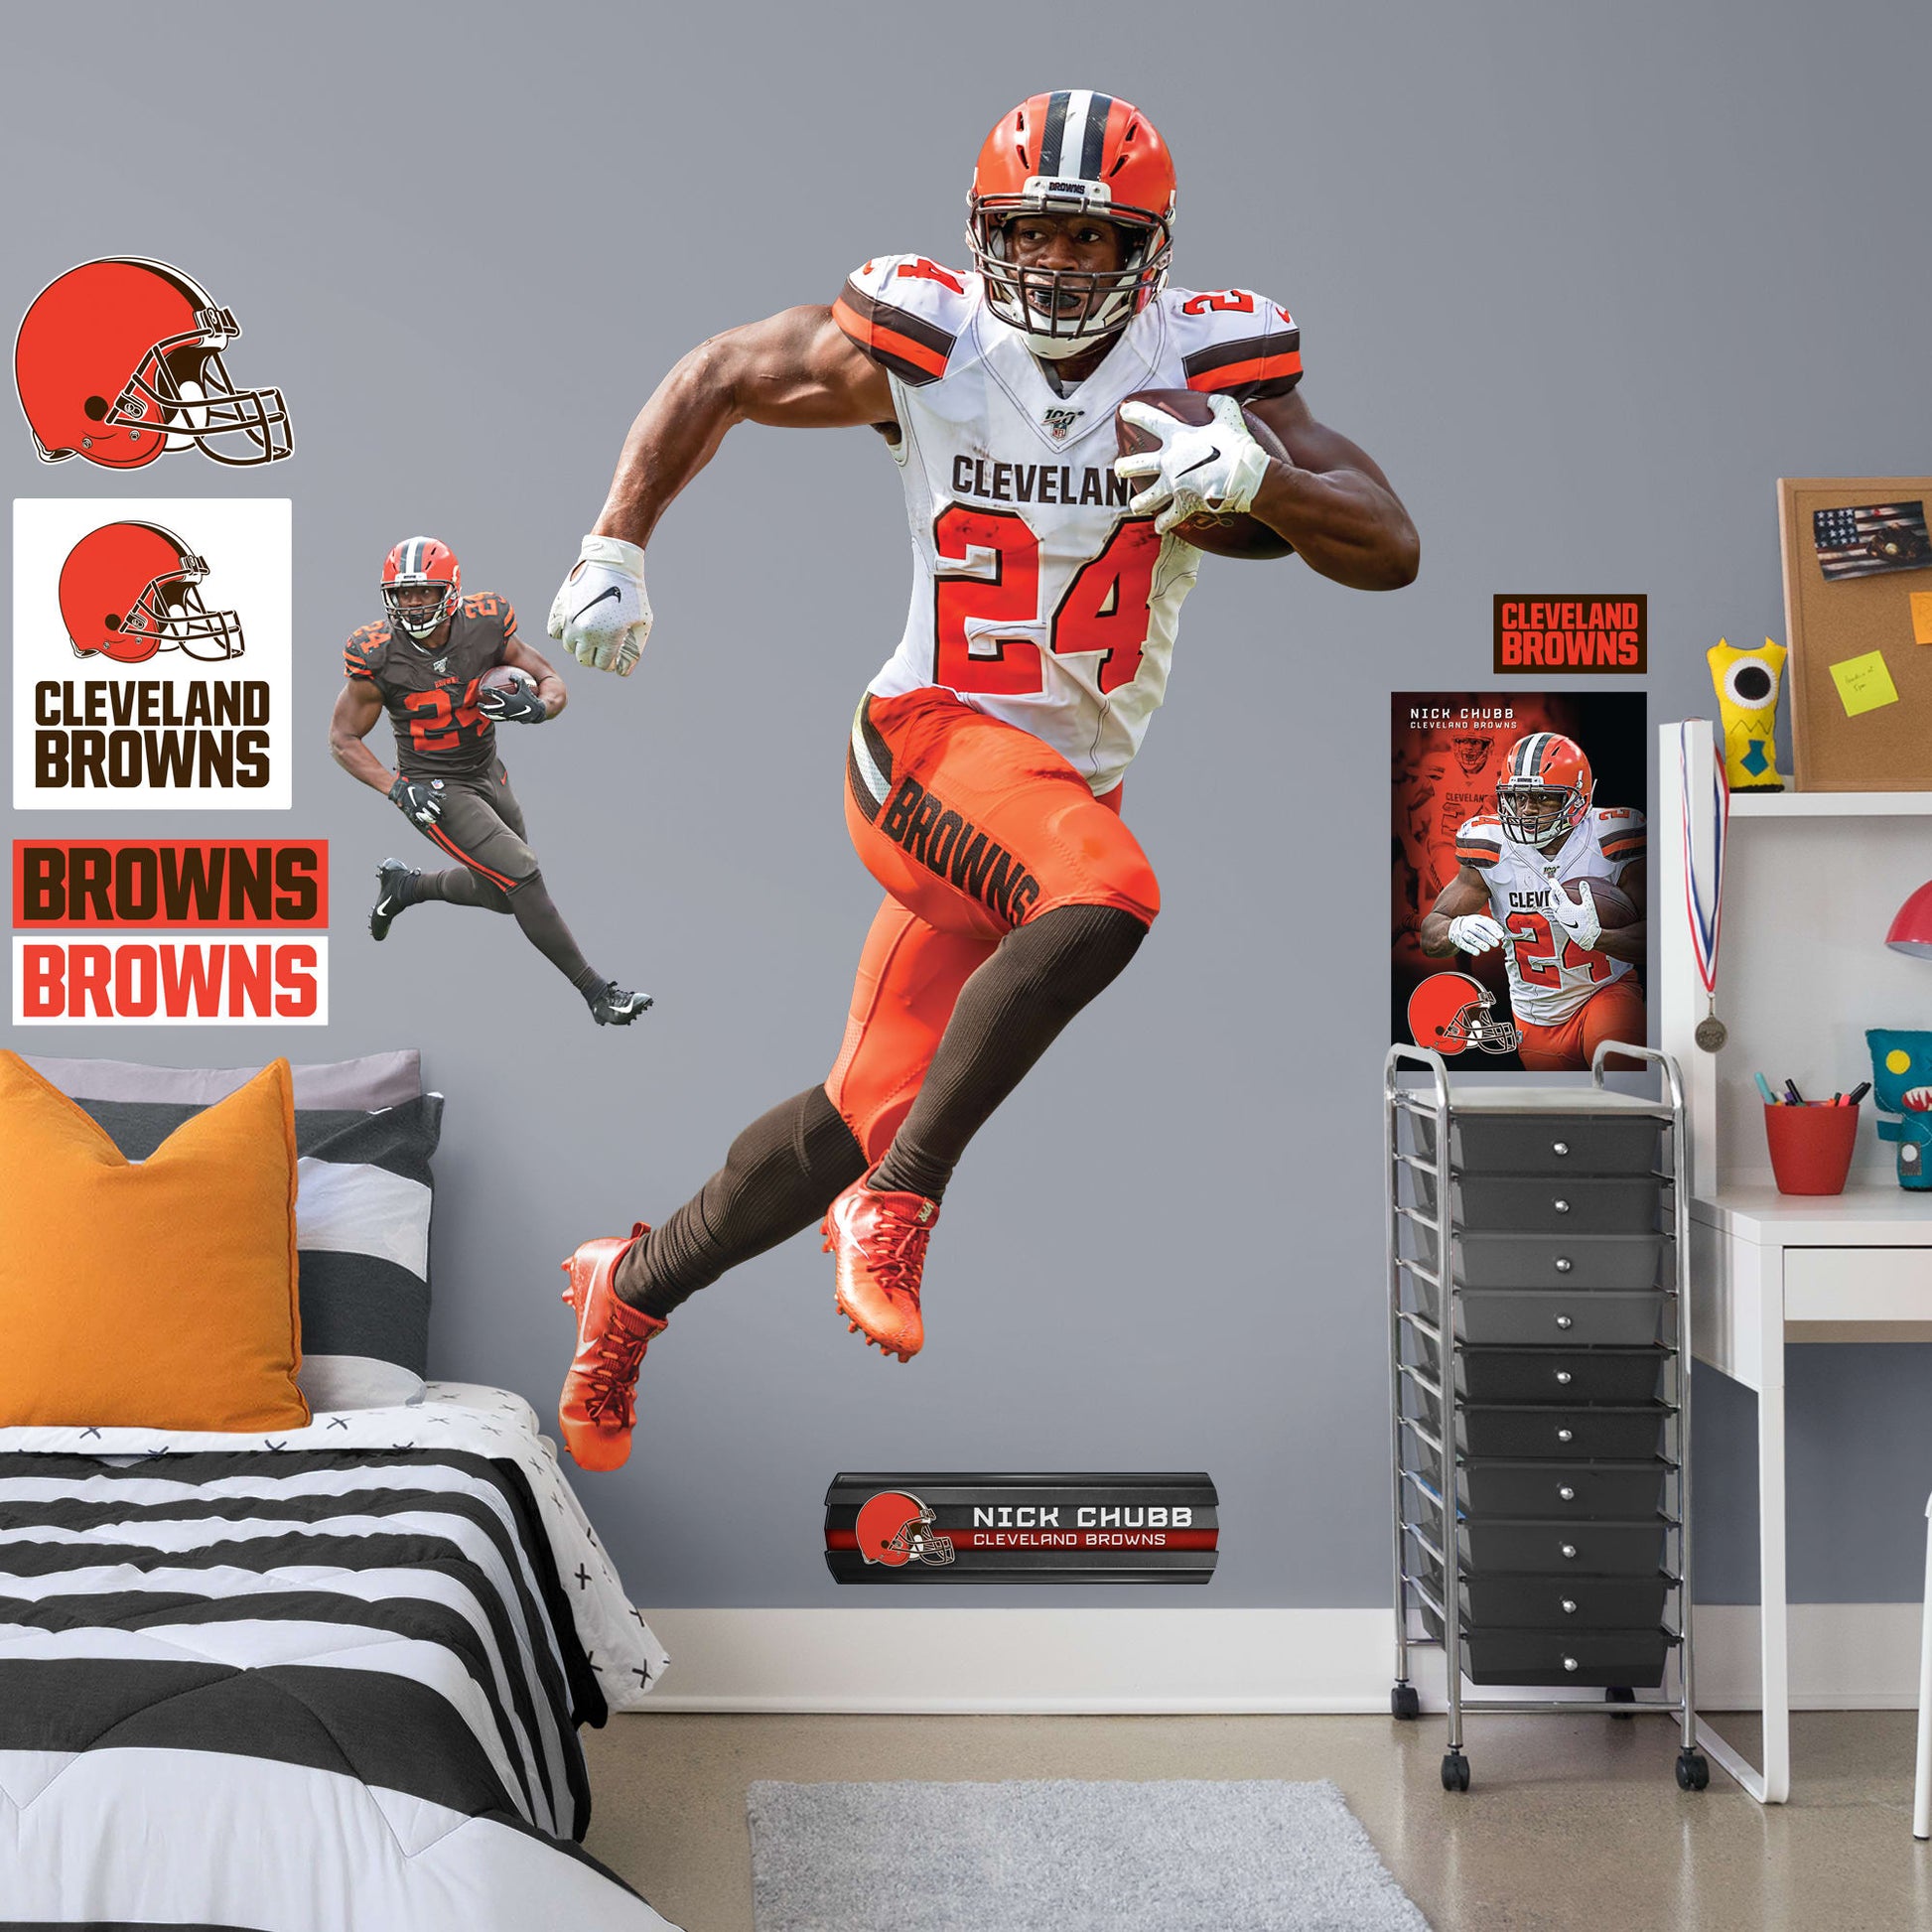 Life-Size Athlete + 10 Decals (48"W x 76"H) Heir to a Cleveland running back a tradition that includes the legendary Jim Brown, Nick Chubb is the new Browns powerhouse. Blessed with a blend of power, balance, and speed, the man they call Old School is a nightmare for AFC North foes. Now Dawg Pound fans can salute the former Georgia All-American with this removable wall decal collection. The premium vinyl decals are as durable as Chubb himself and ready to charge through a bonus room, bedroom, or dorm. Woof!